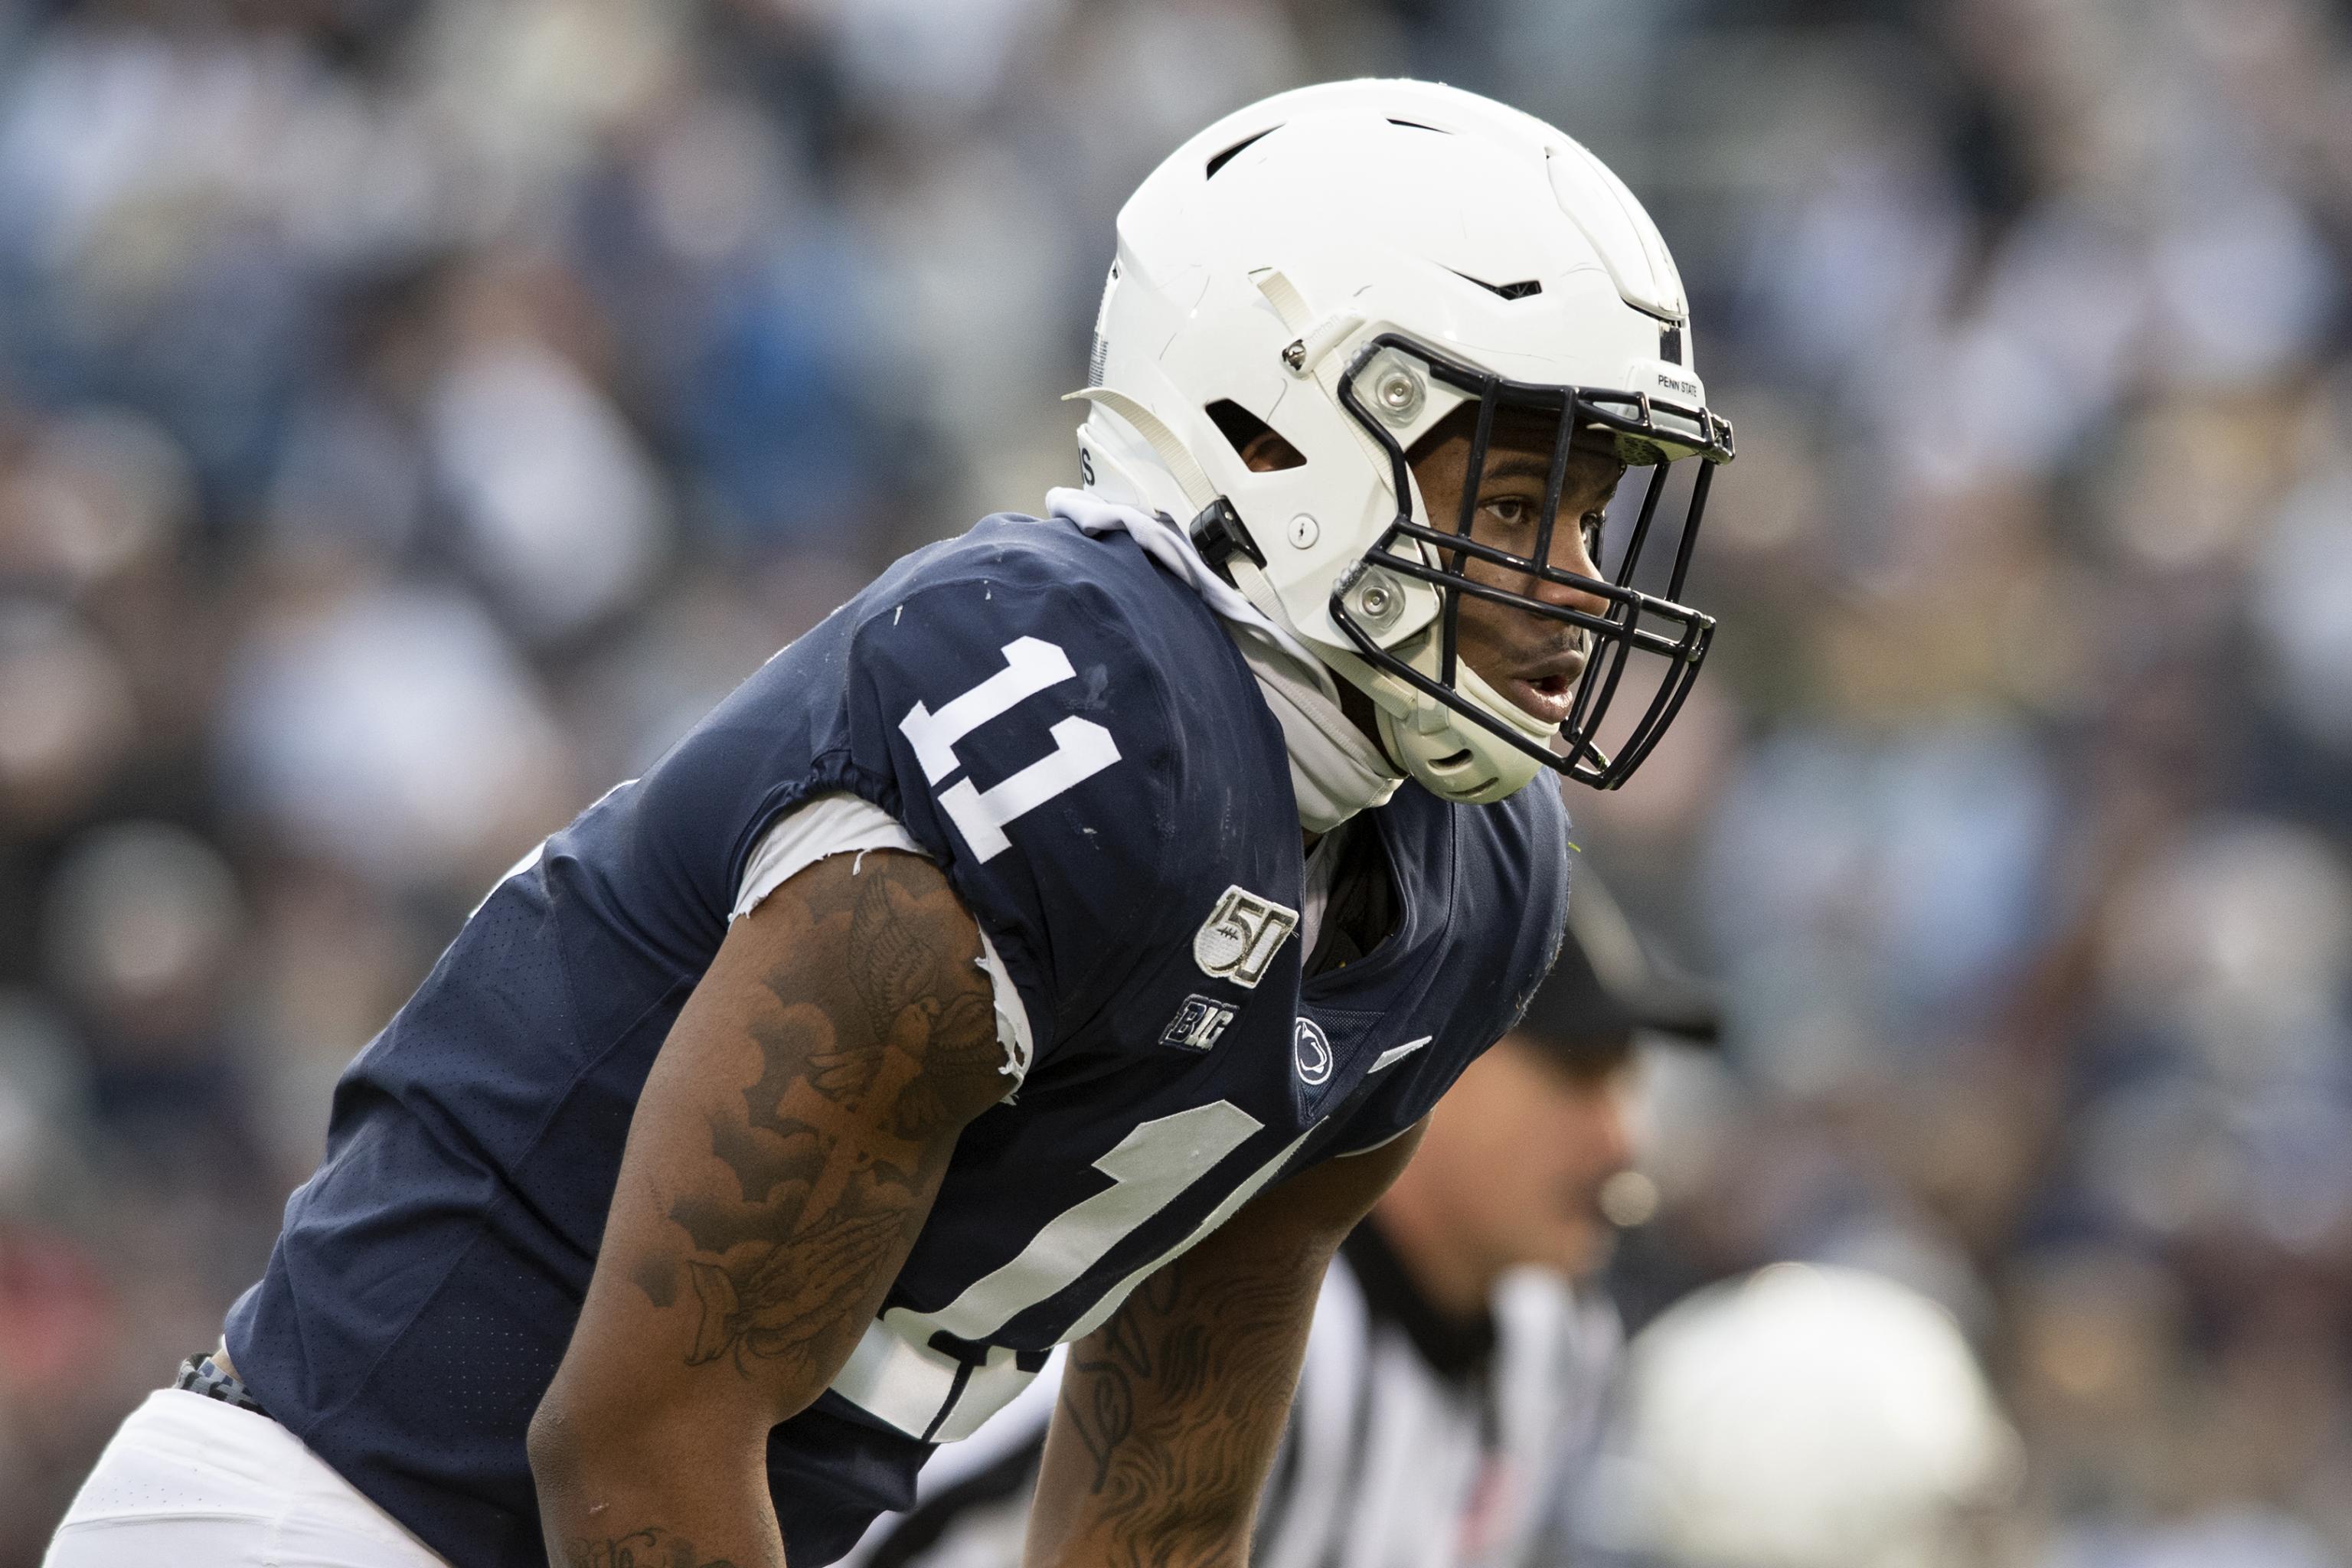 PSU's Micah Parsons Announces He Will Opt Out, Prep for NFL Draft Amid